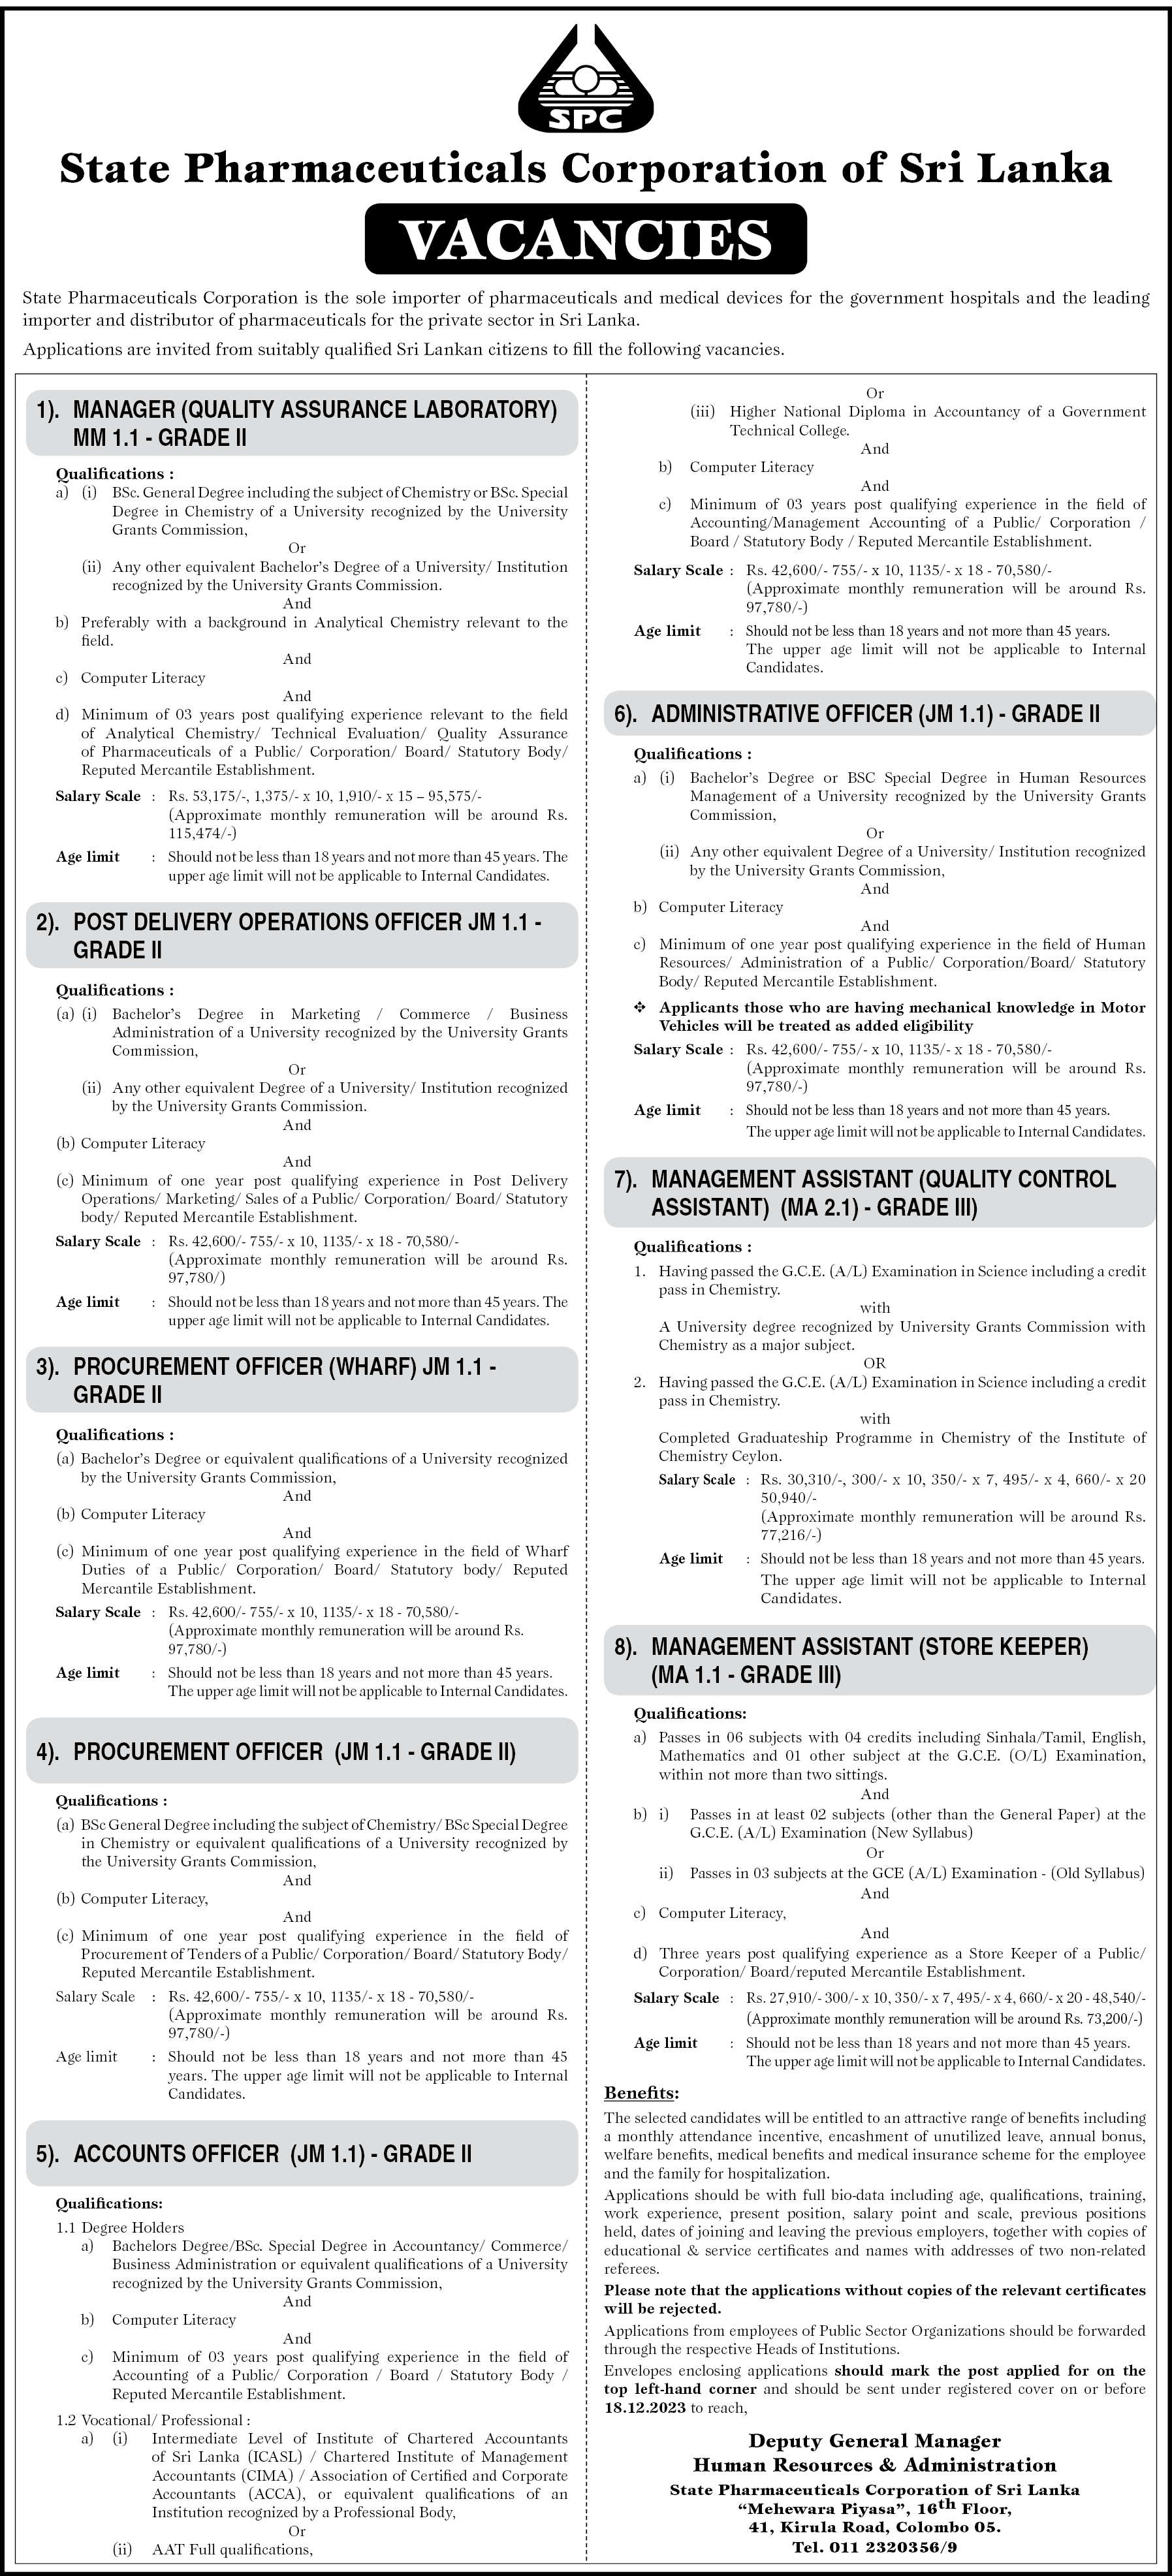 Manager, Delivery Operations  officer, Procurement officer,  Accounts officer,  Administrative Officer, Management Assistant